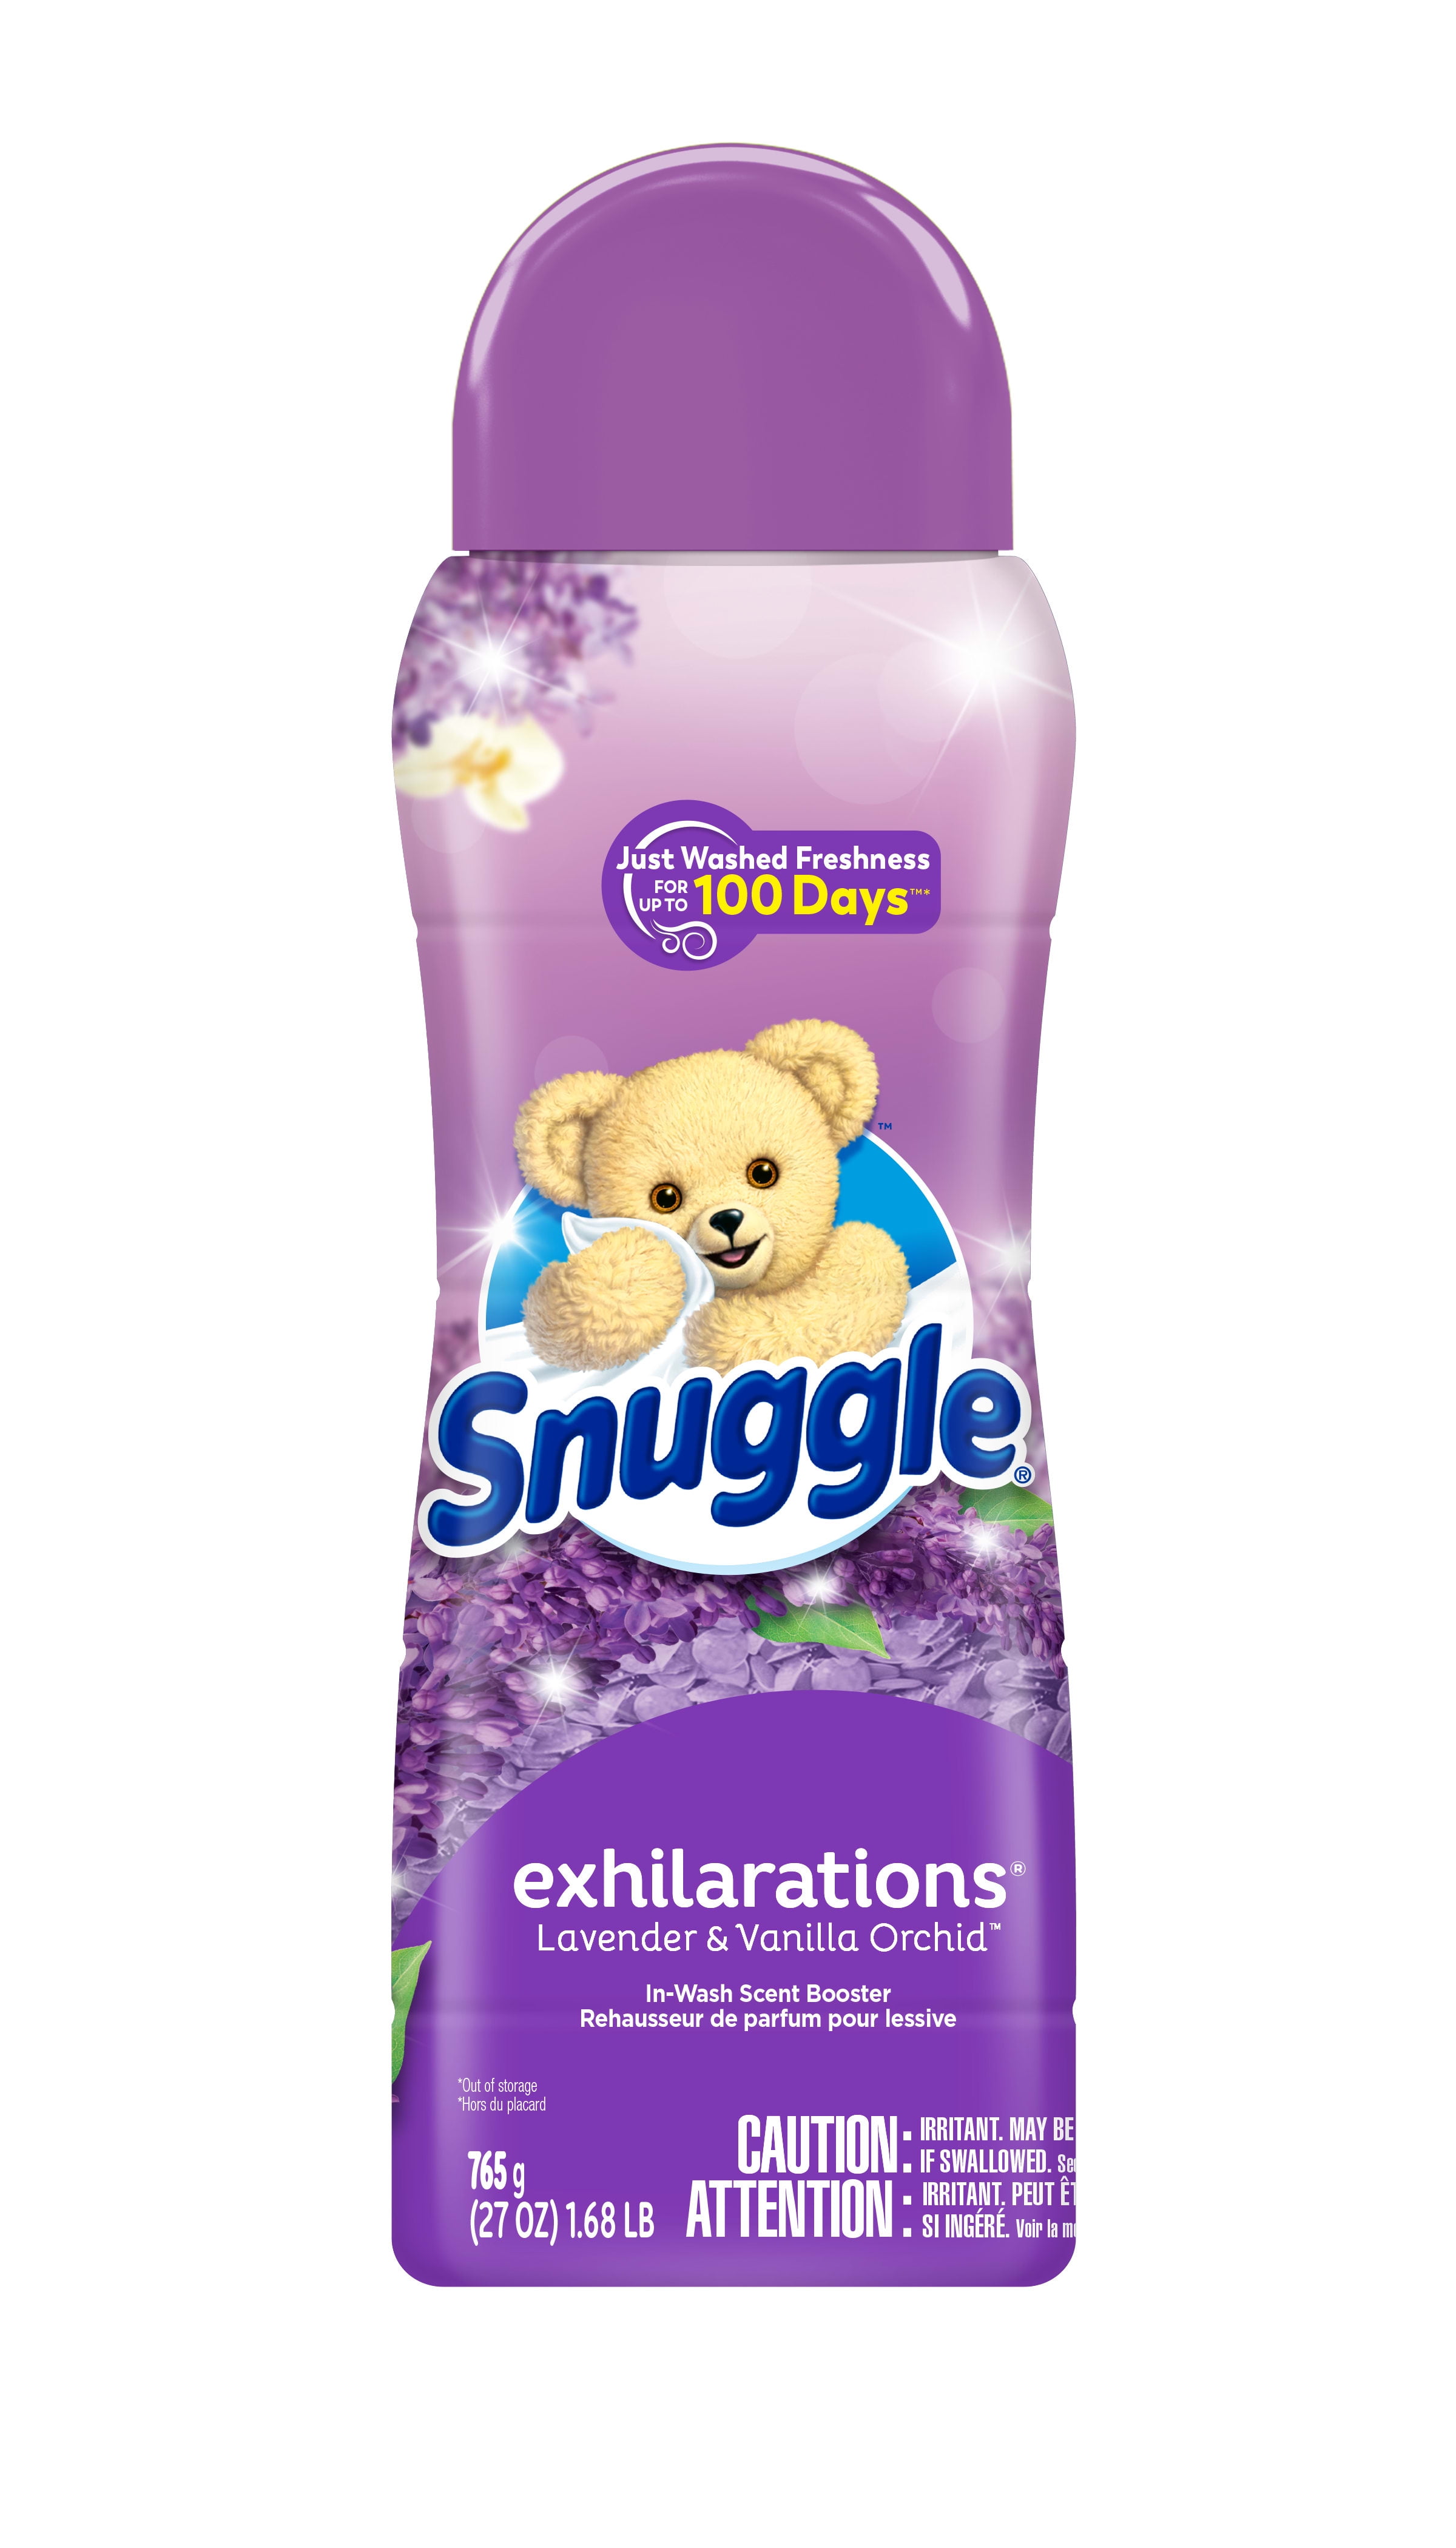 Snuggle Exhilarations Laundry Scent Booster Beads, Lavender and Vanilla Orchid, 27 Ounce